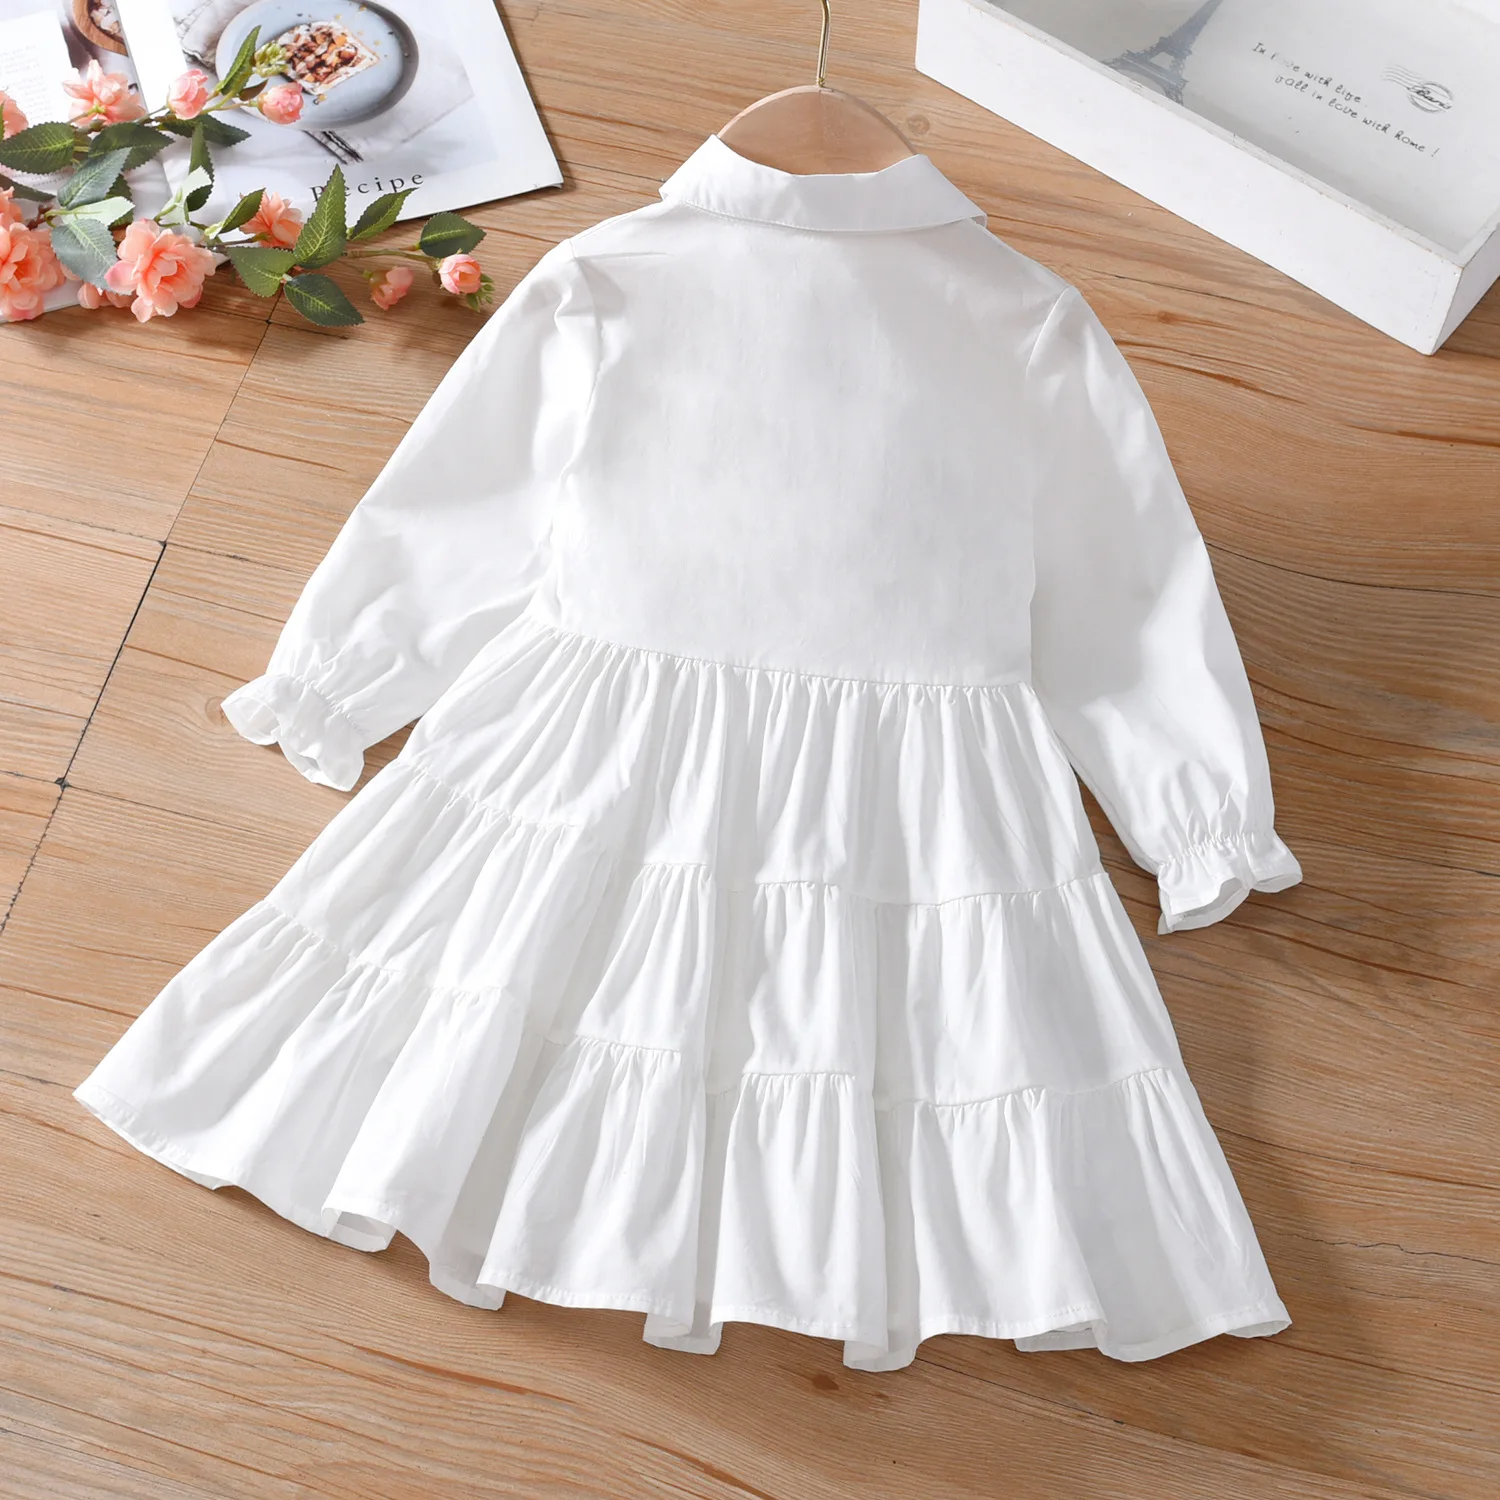 Toddler Kids Baby Girl Autumn Spring Summer Baby Dress White Solid Cotton Linen Party Casual Children Dress Clothes